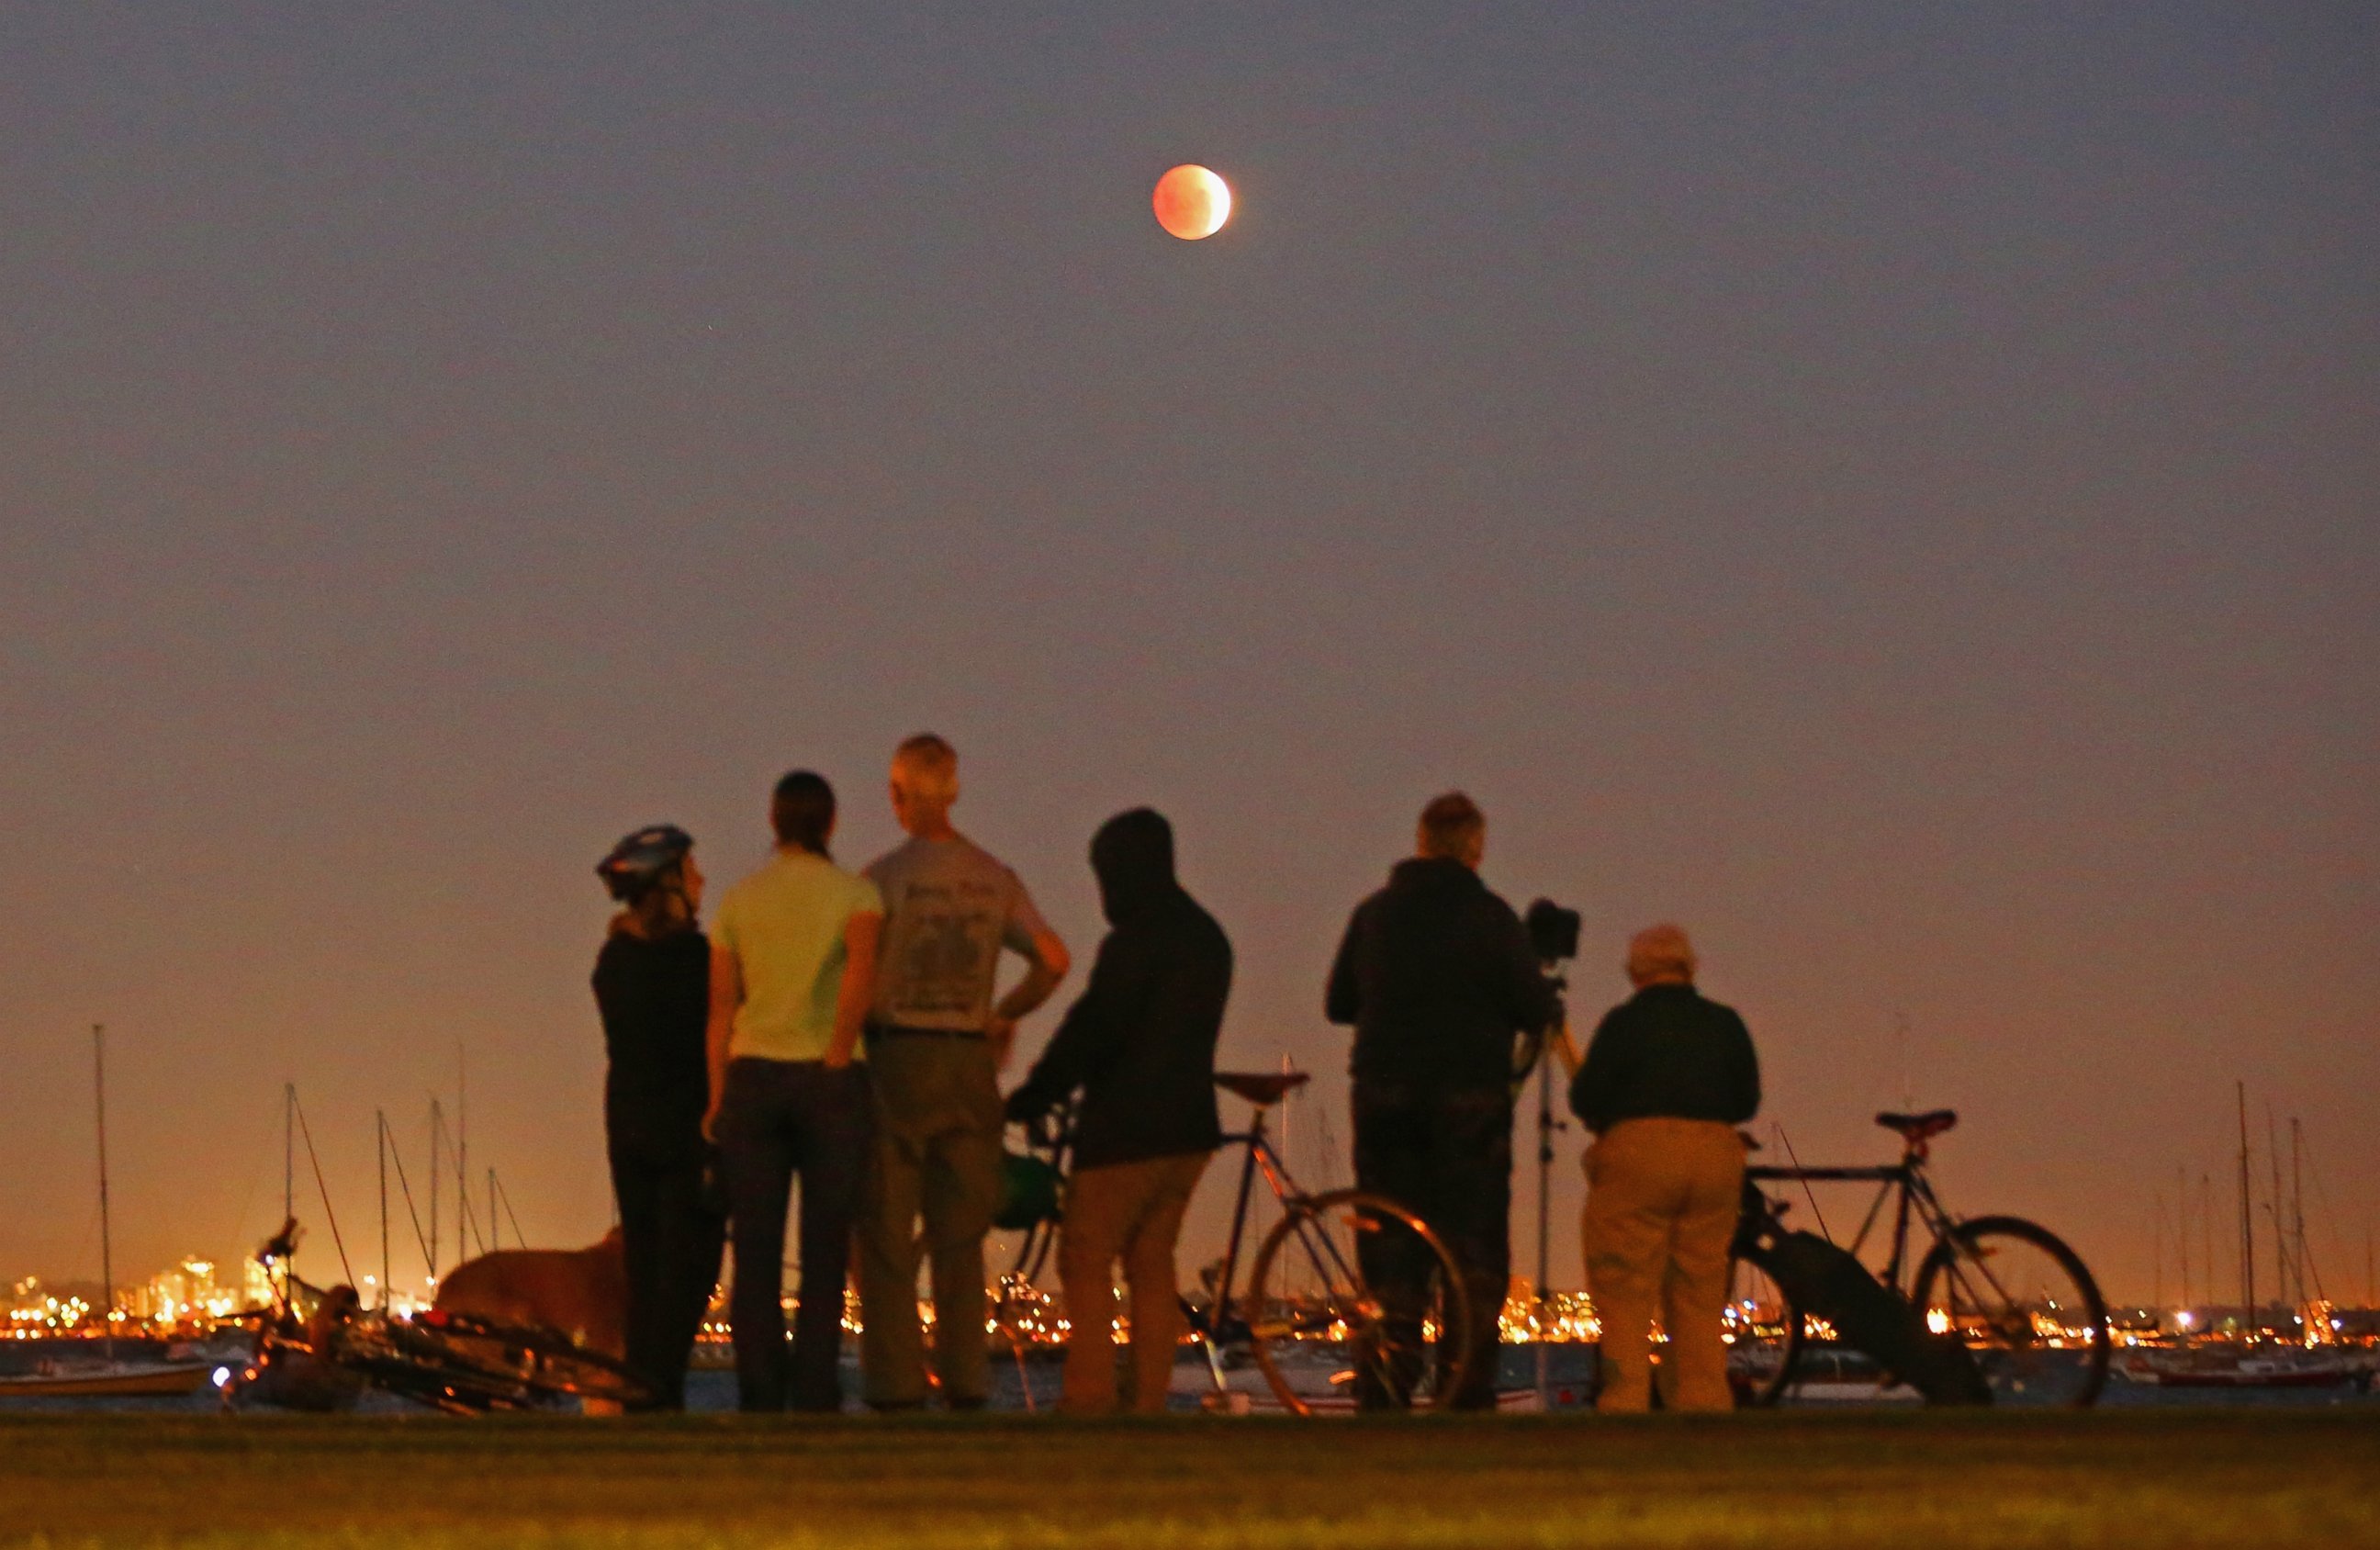 PHOTO: People watch as the 'Blood Moon' rises over the water in Wlliamstown in Melbourne, Australia